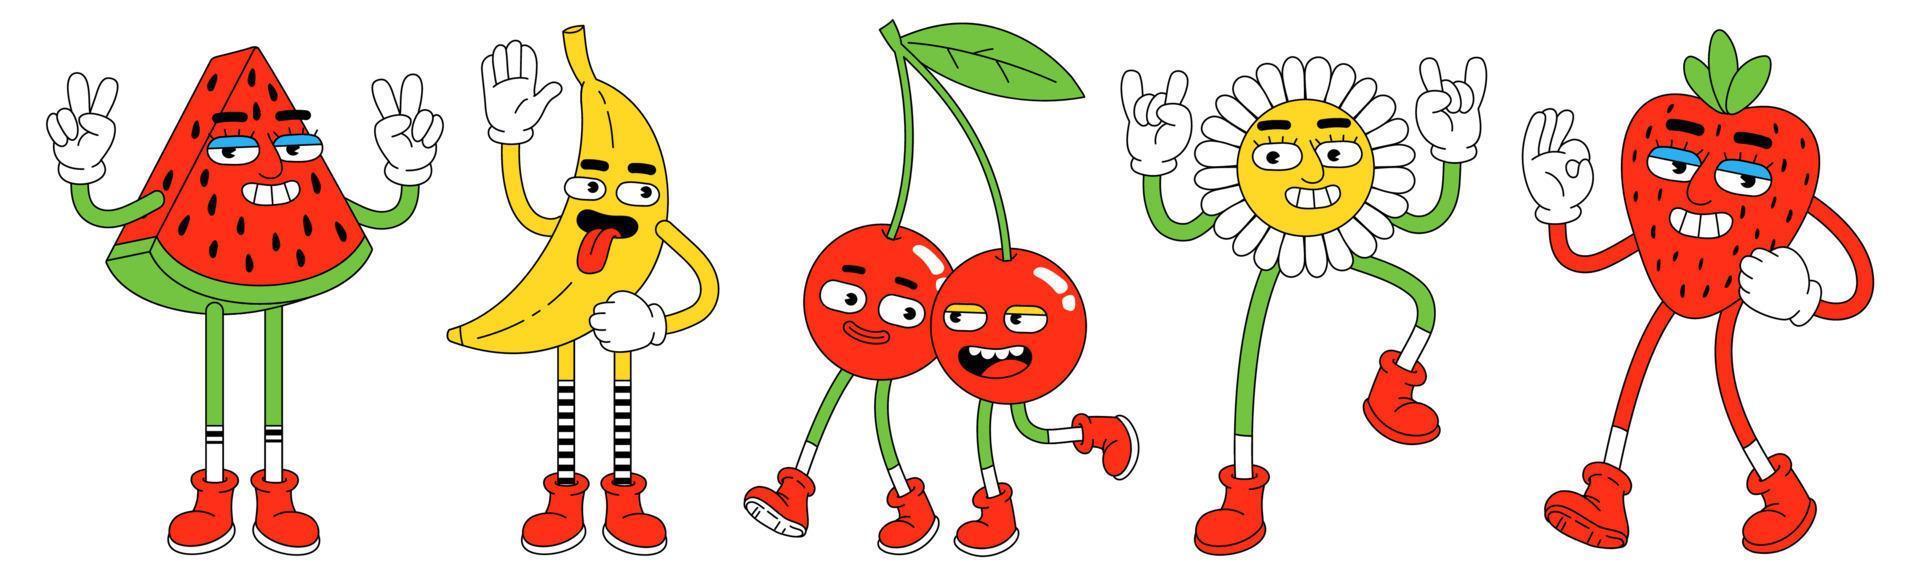 Funny characters in trendy retro cartoon style. Watermelon, banana, cherry, strawberry and flower. vector